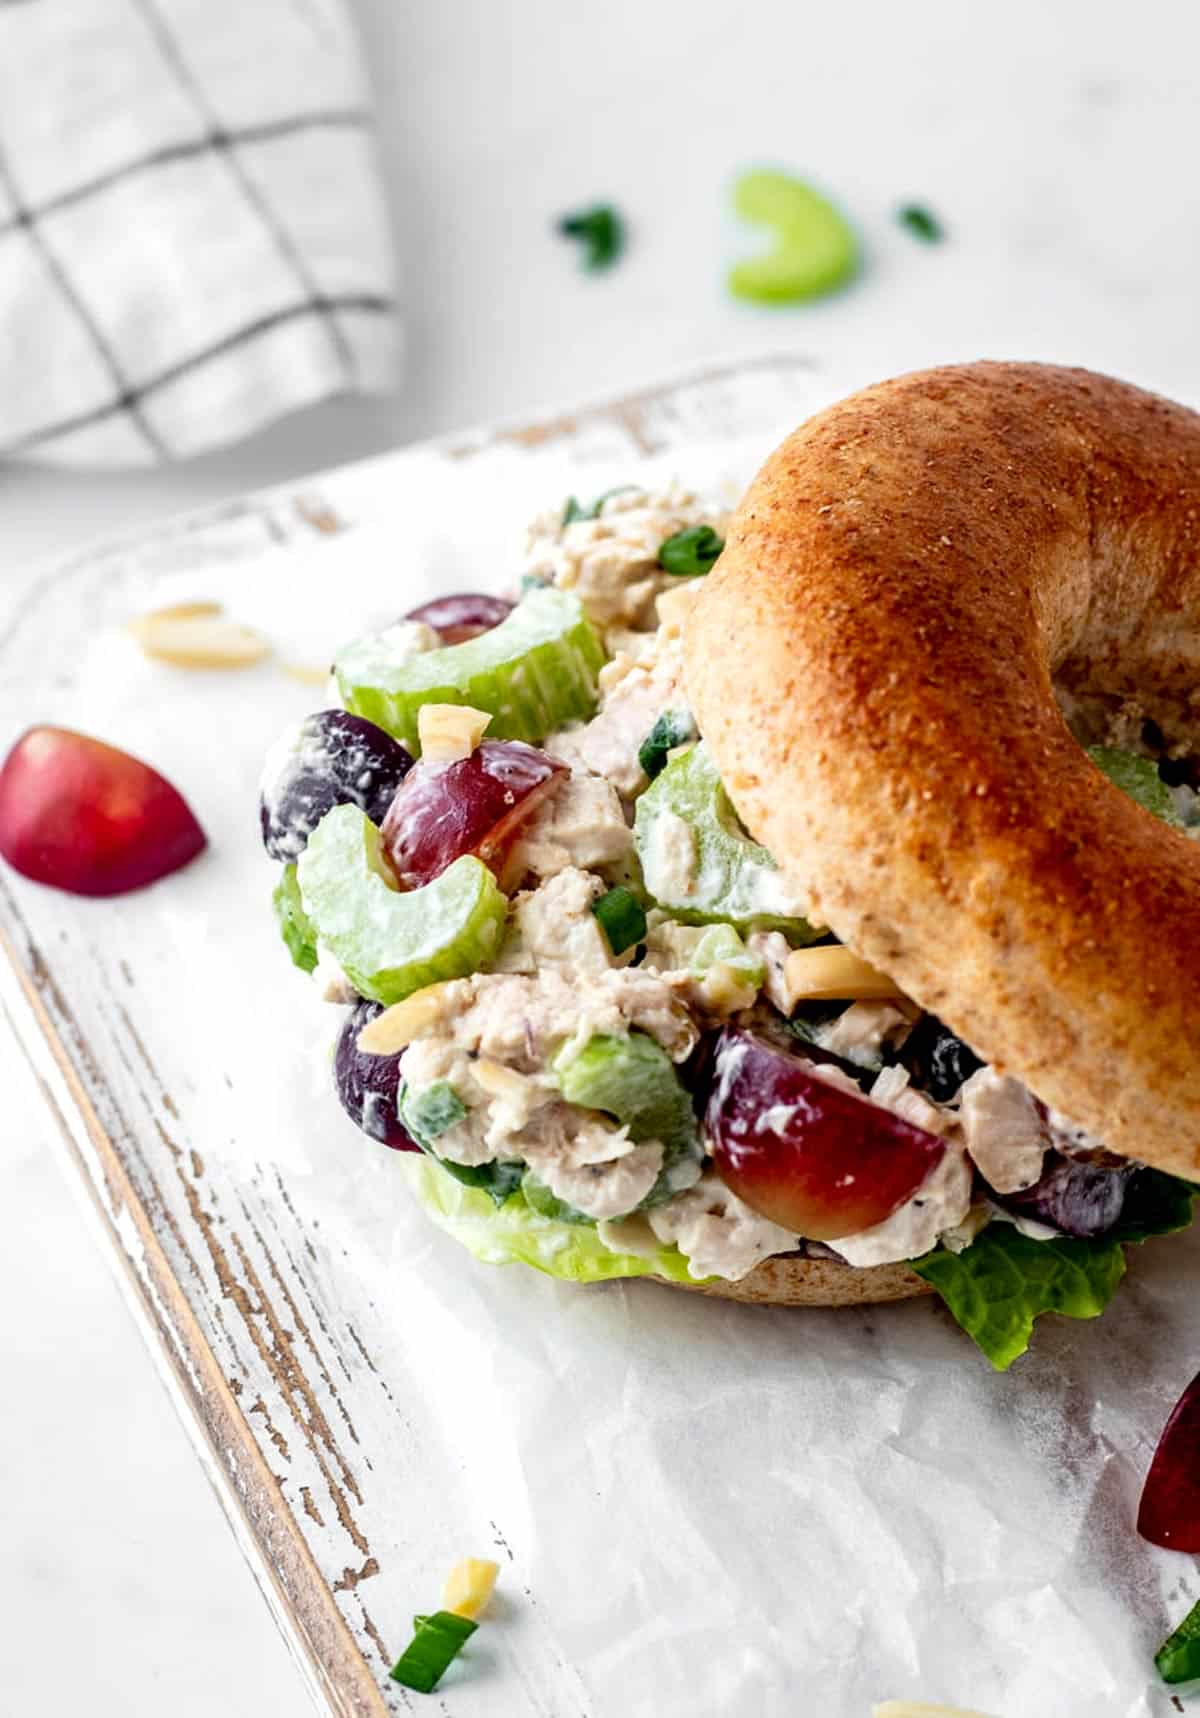 The yogurt chicken salad on a bagel with grapes and almonds.